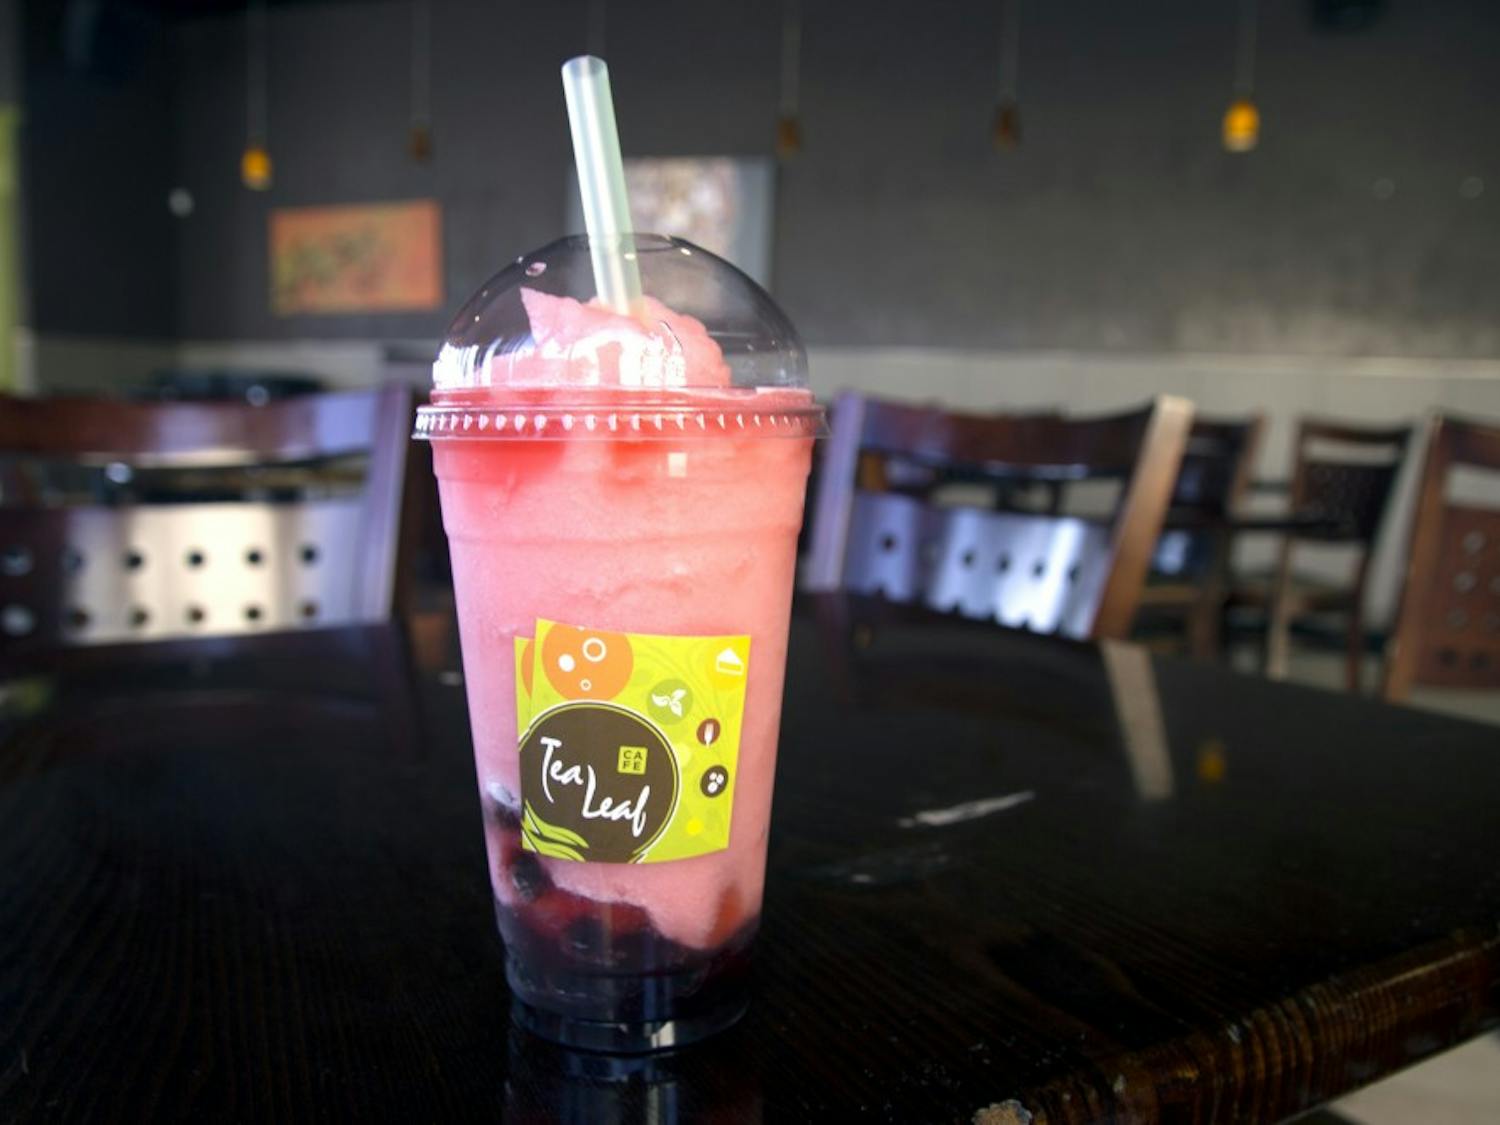 Bubble tea is a delicious drink to enjoy on its own or paired with food. Buffalo has a wide selection of boba cafes, each with their own twist on the drink.